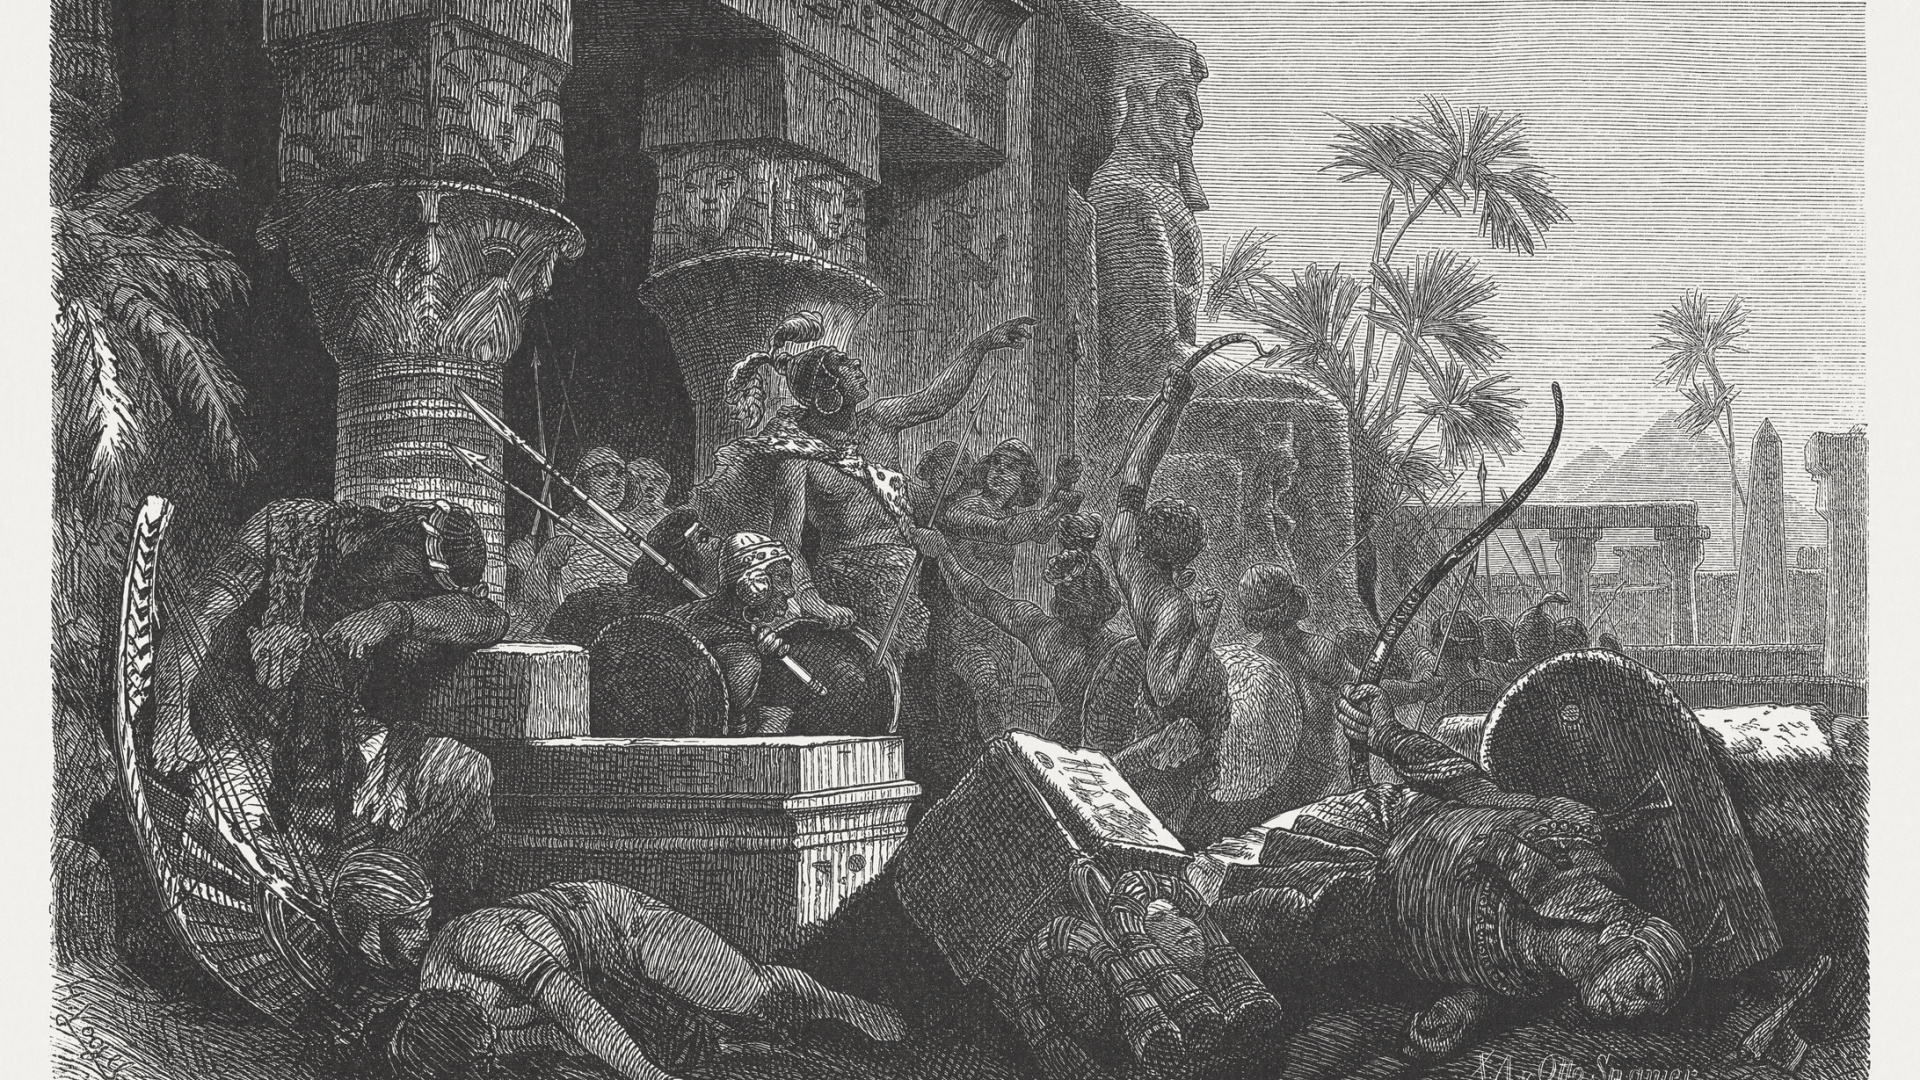 Invasion of the Hyksos in Egypt c.1650 BC, published 1880